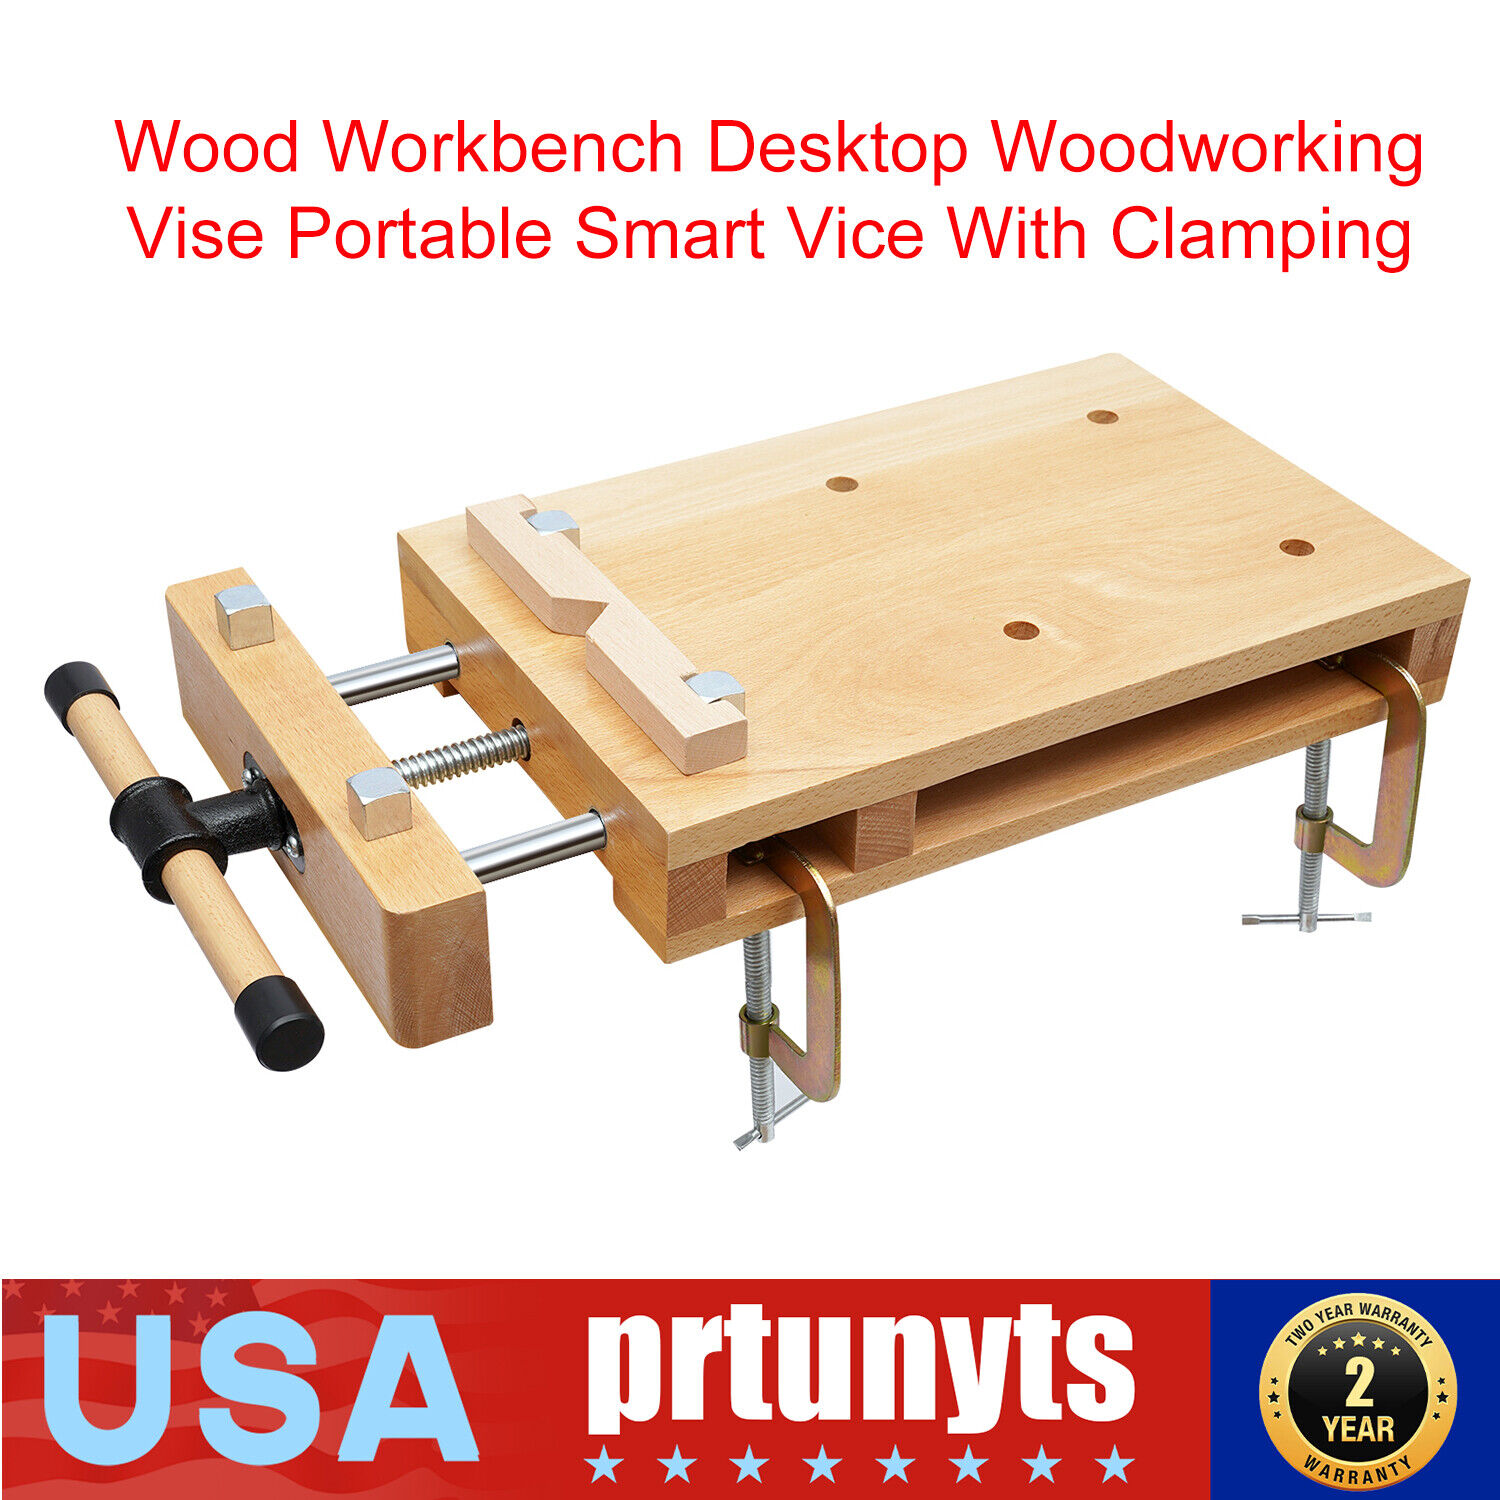 Wood Workbench Desktop Woodworking Vise Portable Smart Vice With Clamping